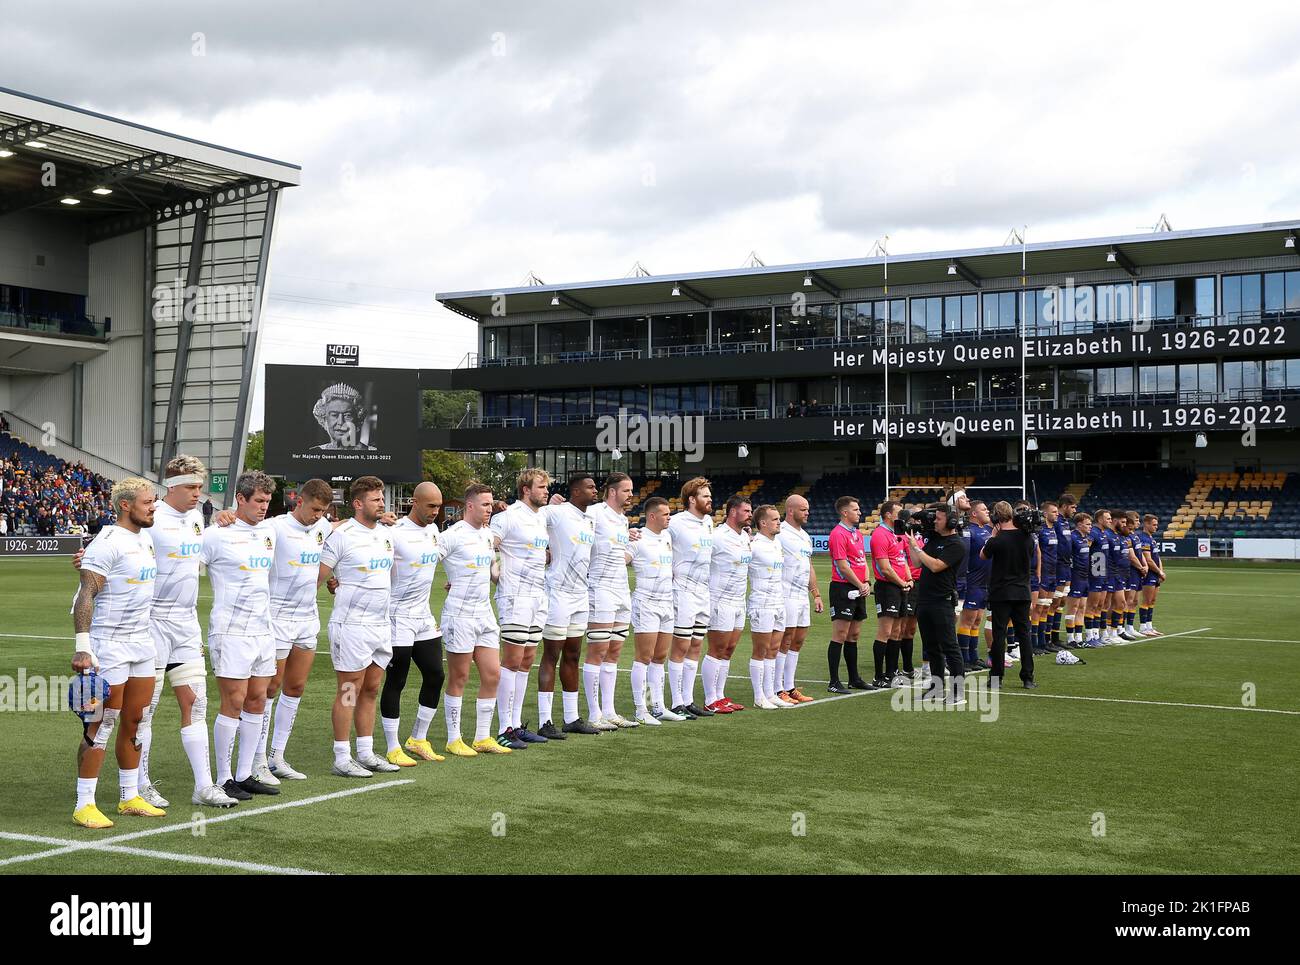 Players observe a minute's silence for Queen Elizabeth II following her death on Thursday September 8, 2022, ahead of the Gallagher Premiership match at Sixways Stadium, Worcester. Picture date: Sunday September 18, 2022. Stock Photo